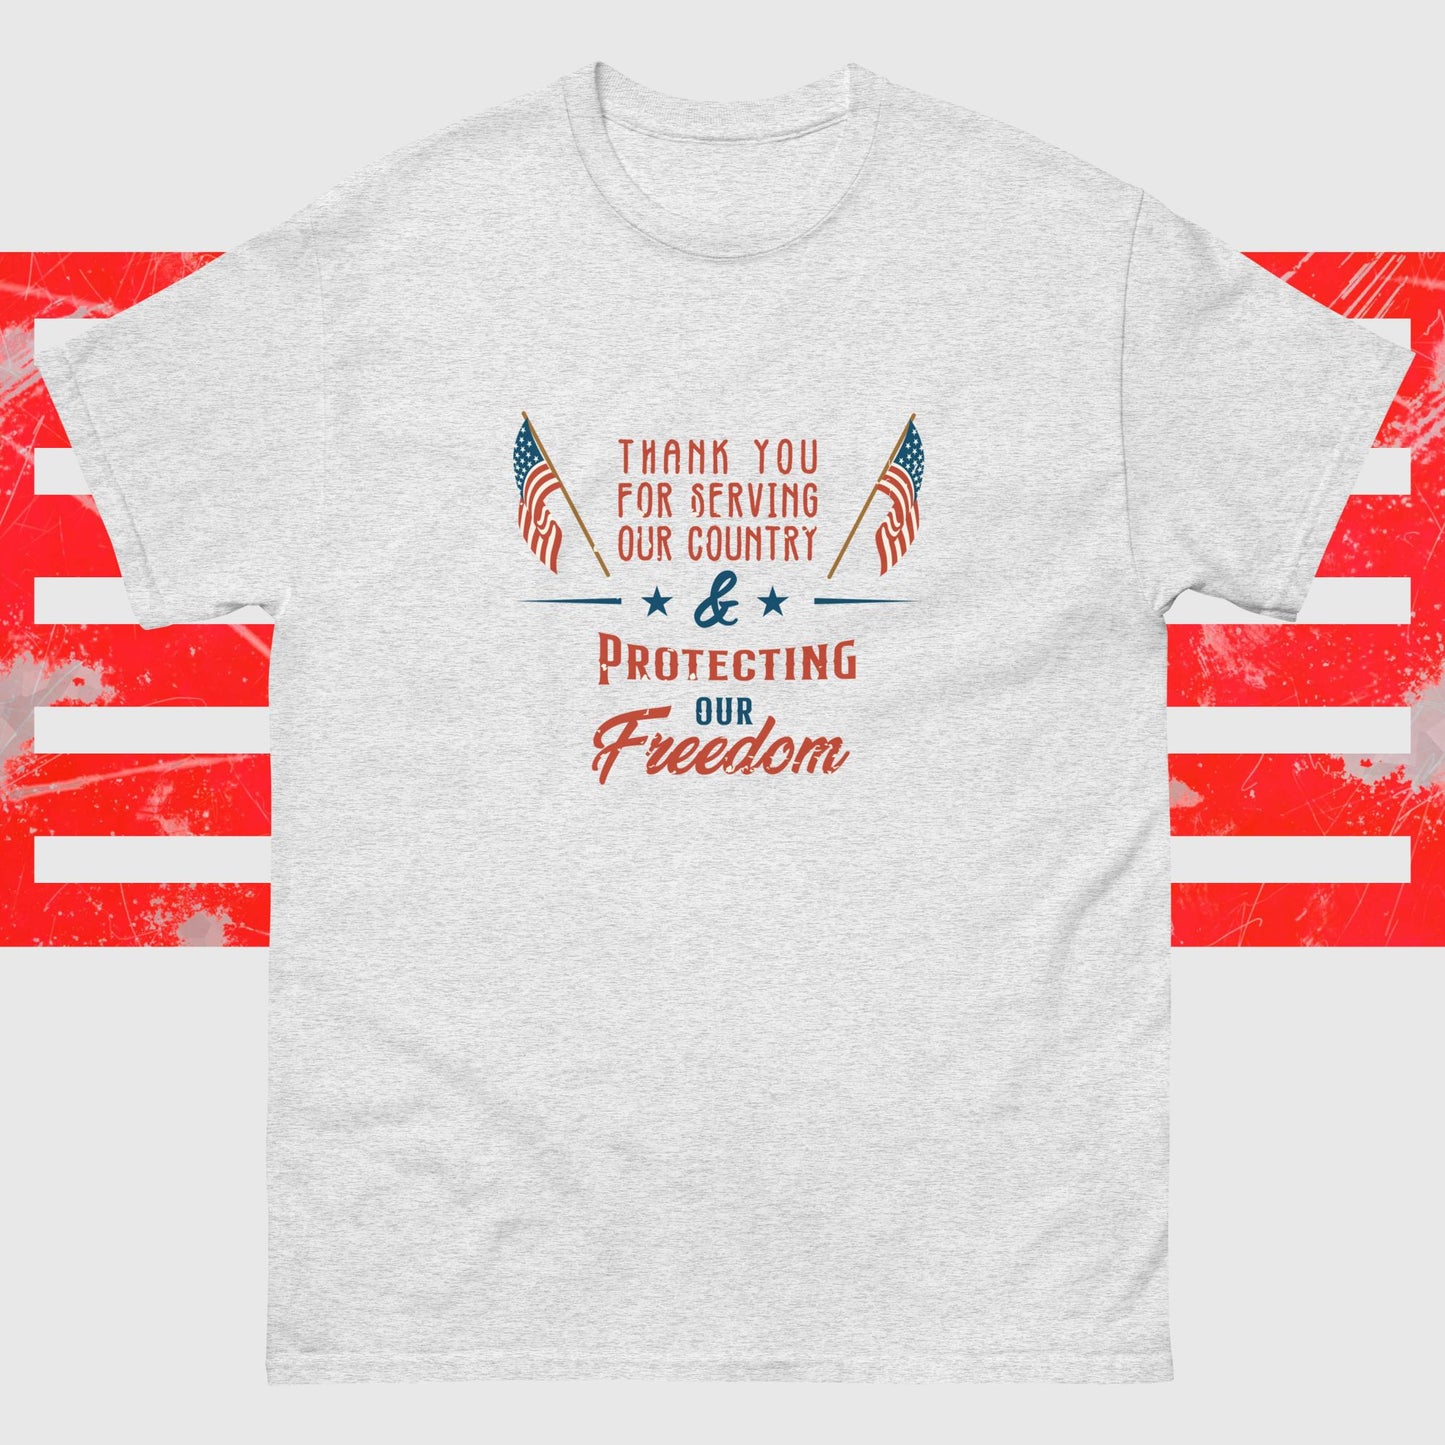 PATRIOTIC TEE FOR VETERANS DAY PROTECTING FREEDOM ASH FRONT - www.firstamericanstore.com